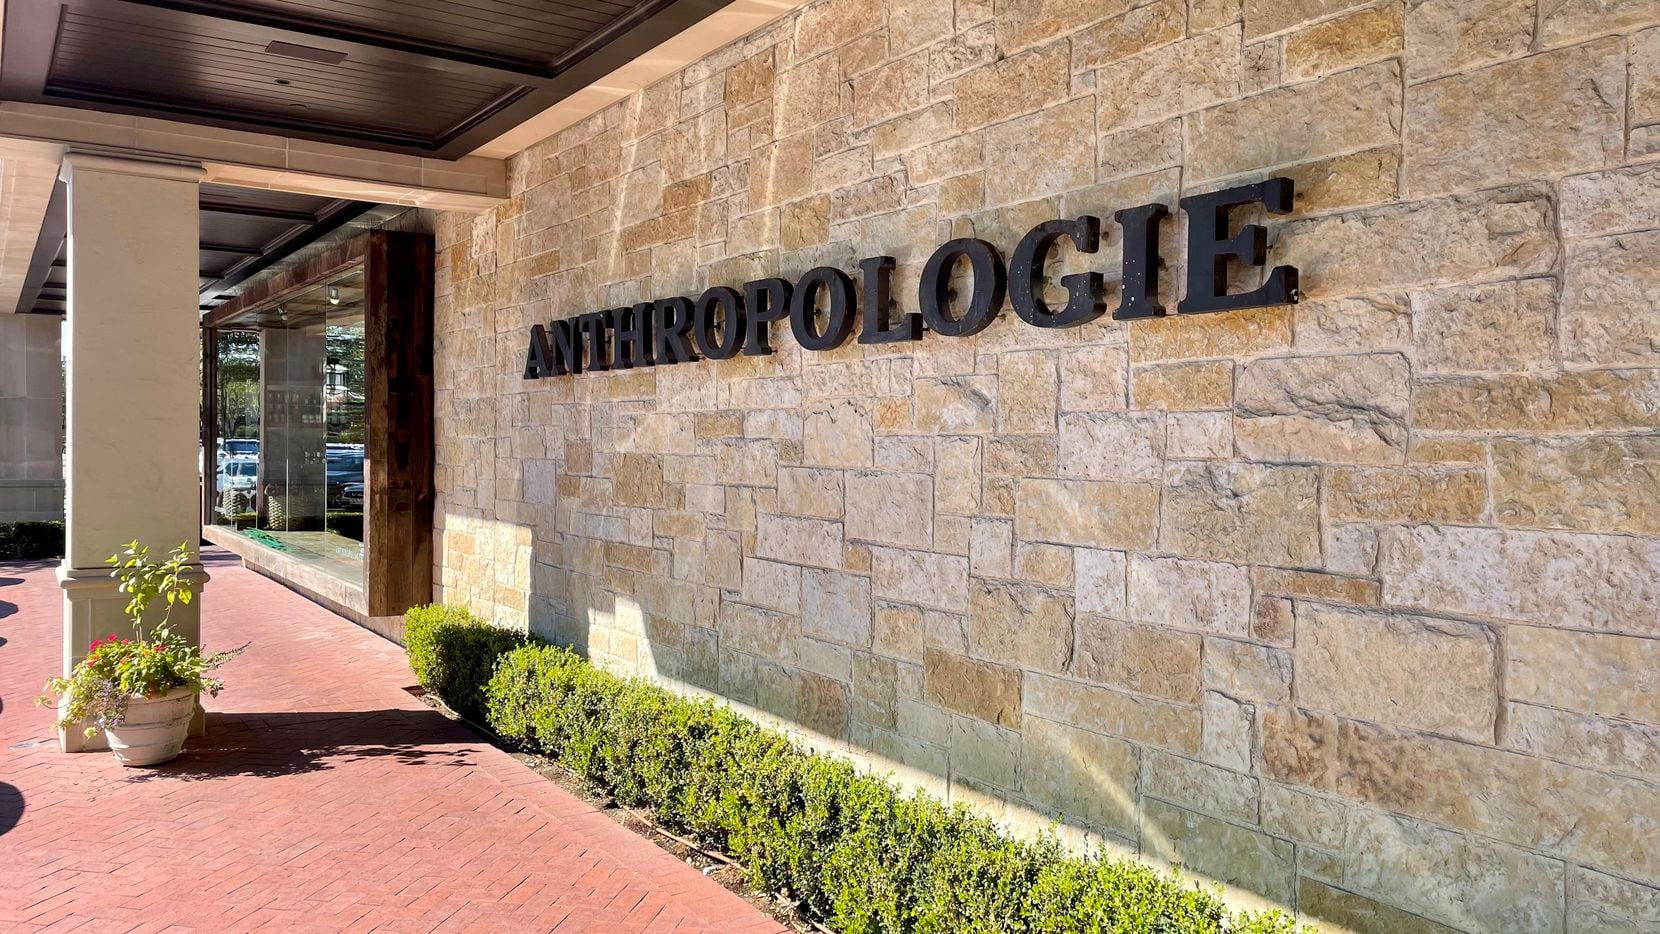 Anthropologie at Highland Park Village is moving to Knox Street in early 2022.